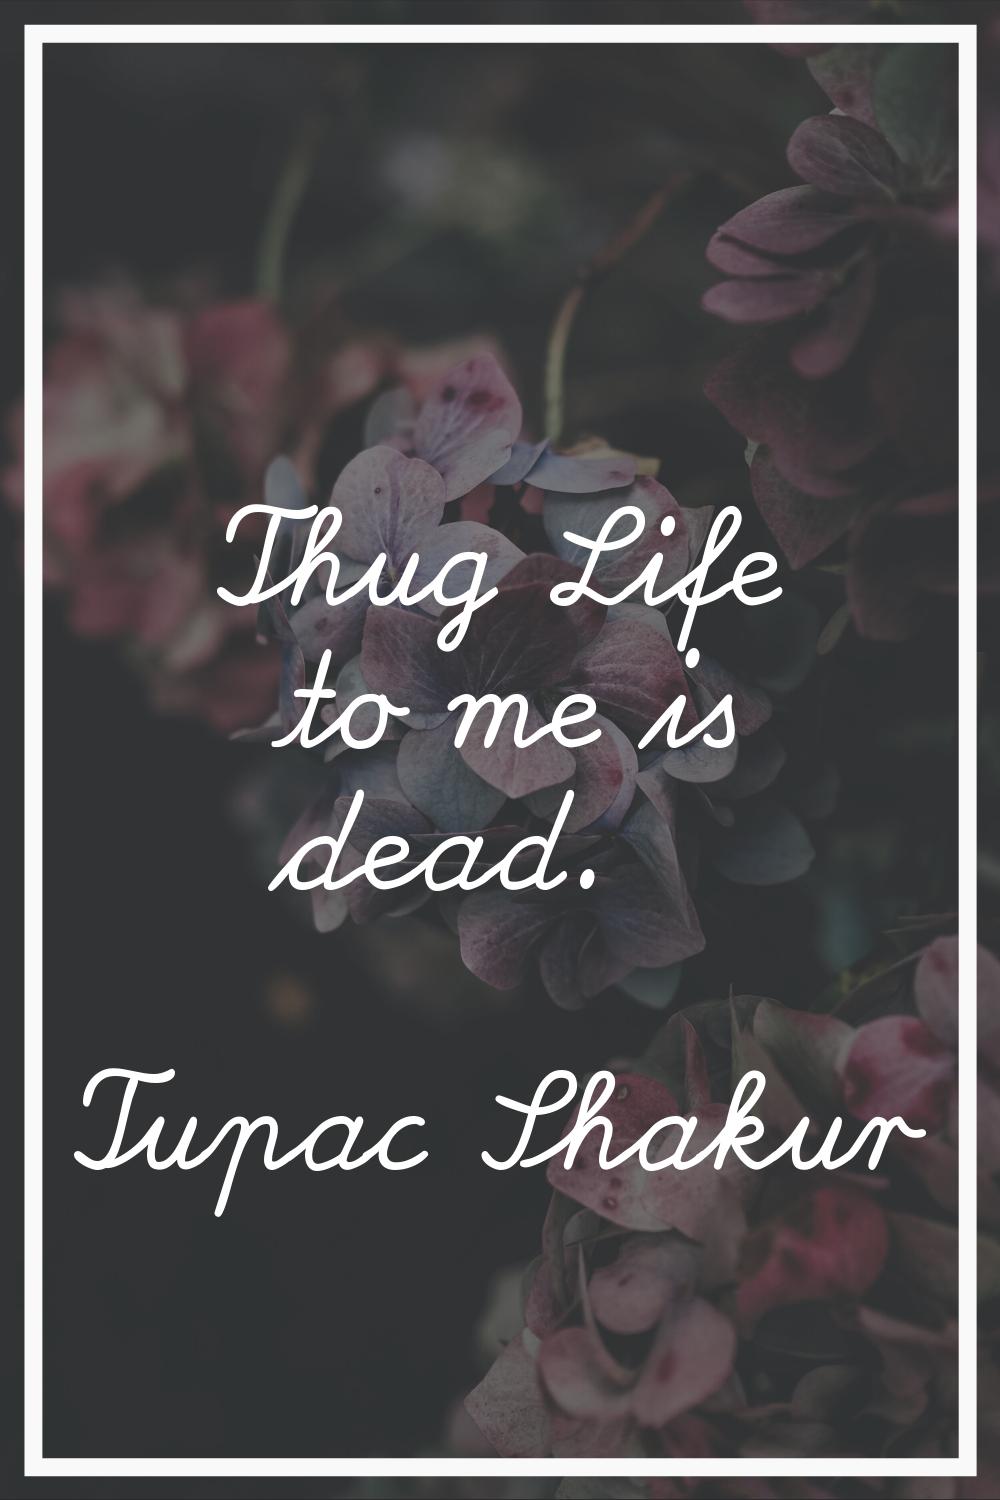 Thug Life to me is dead.